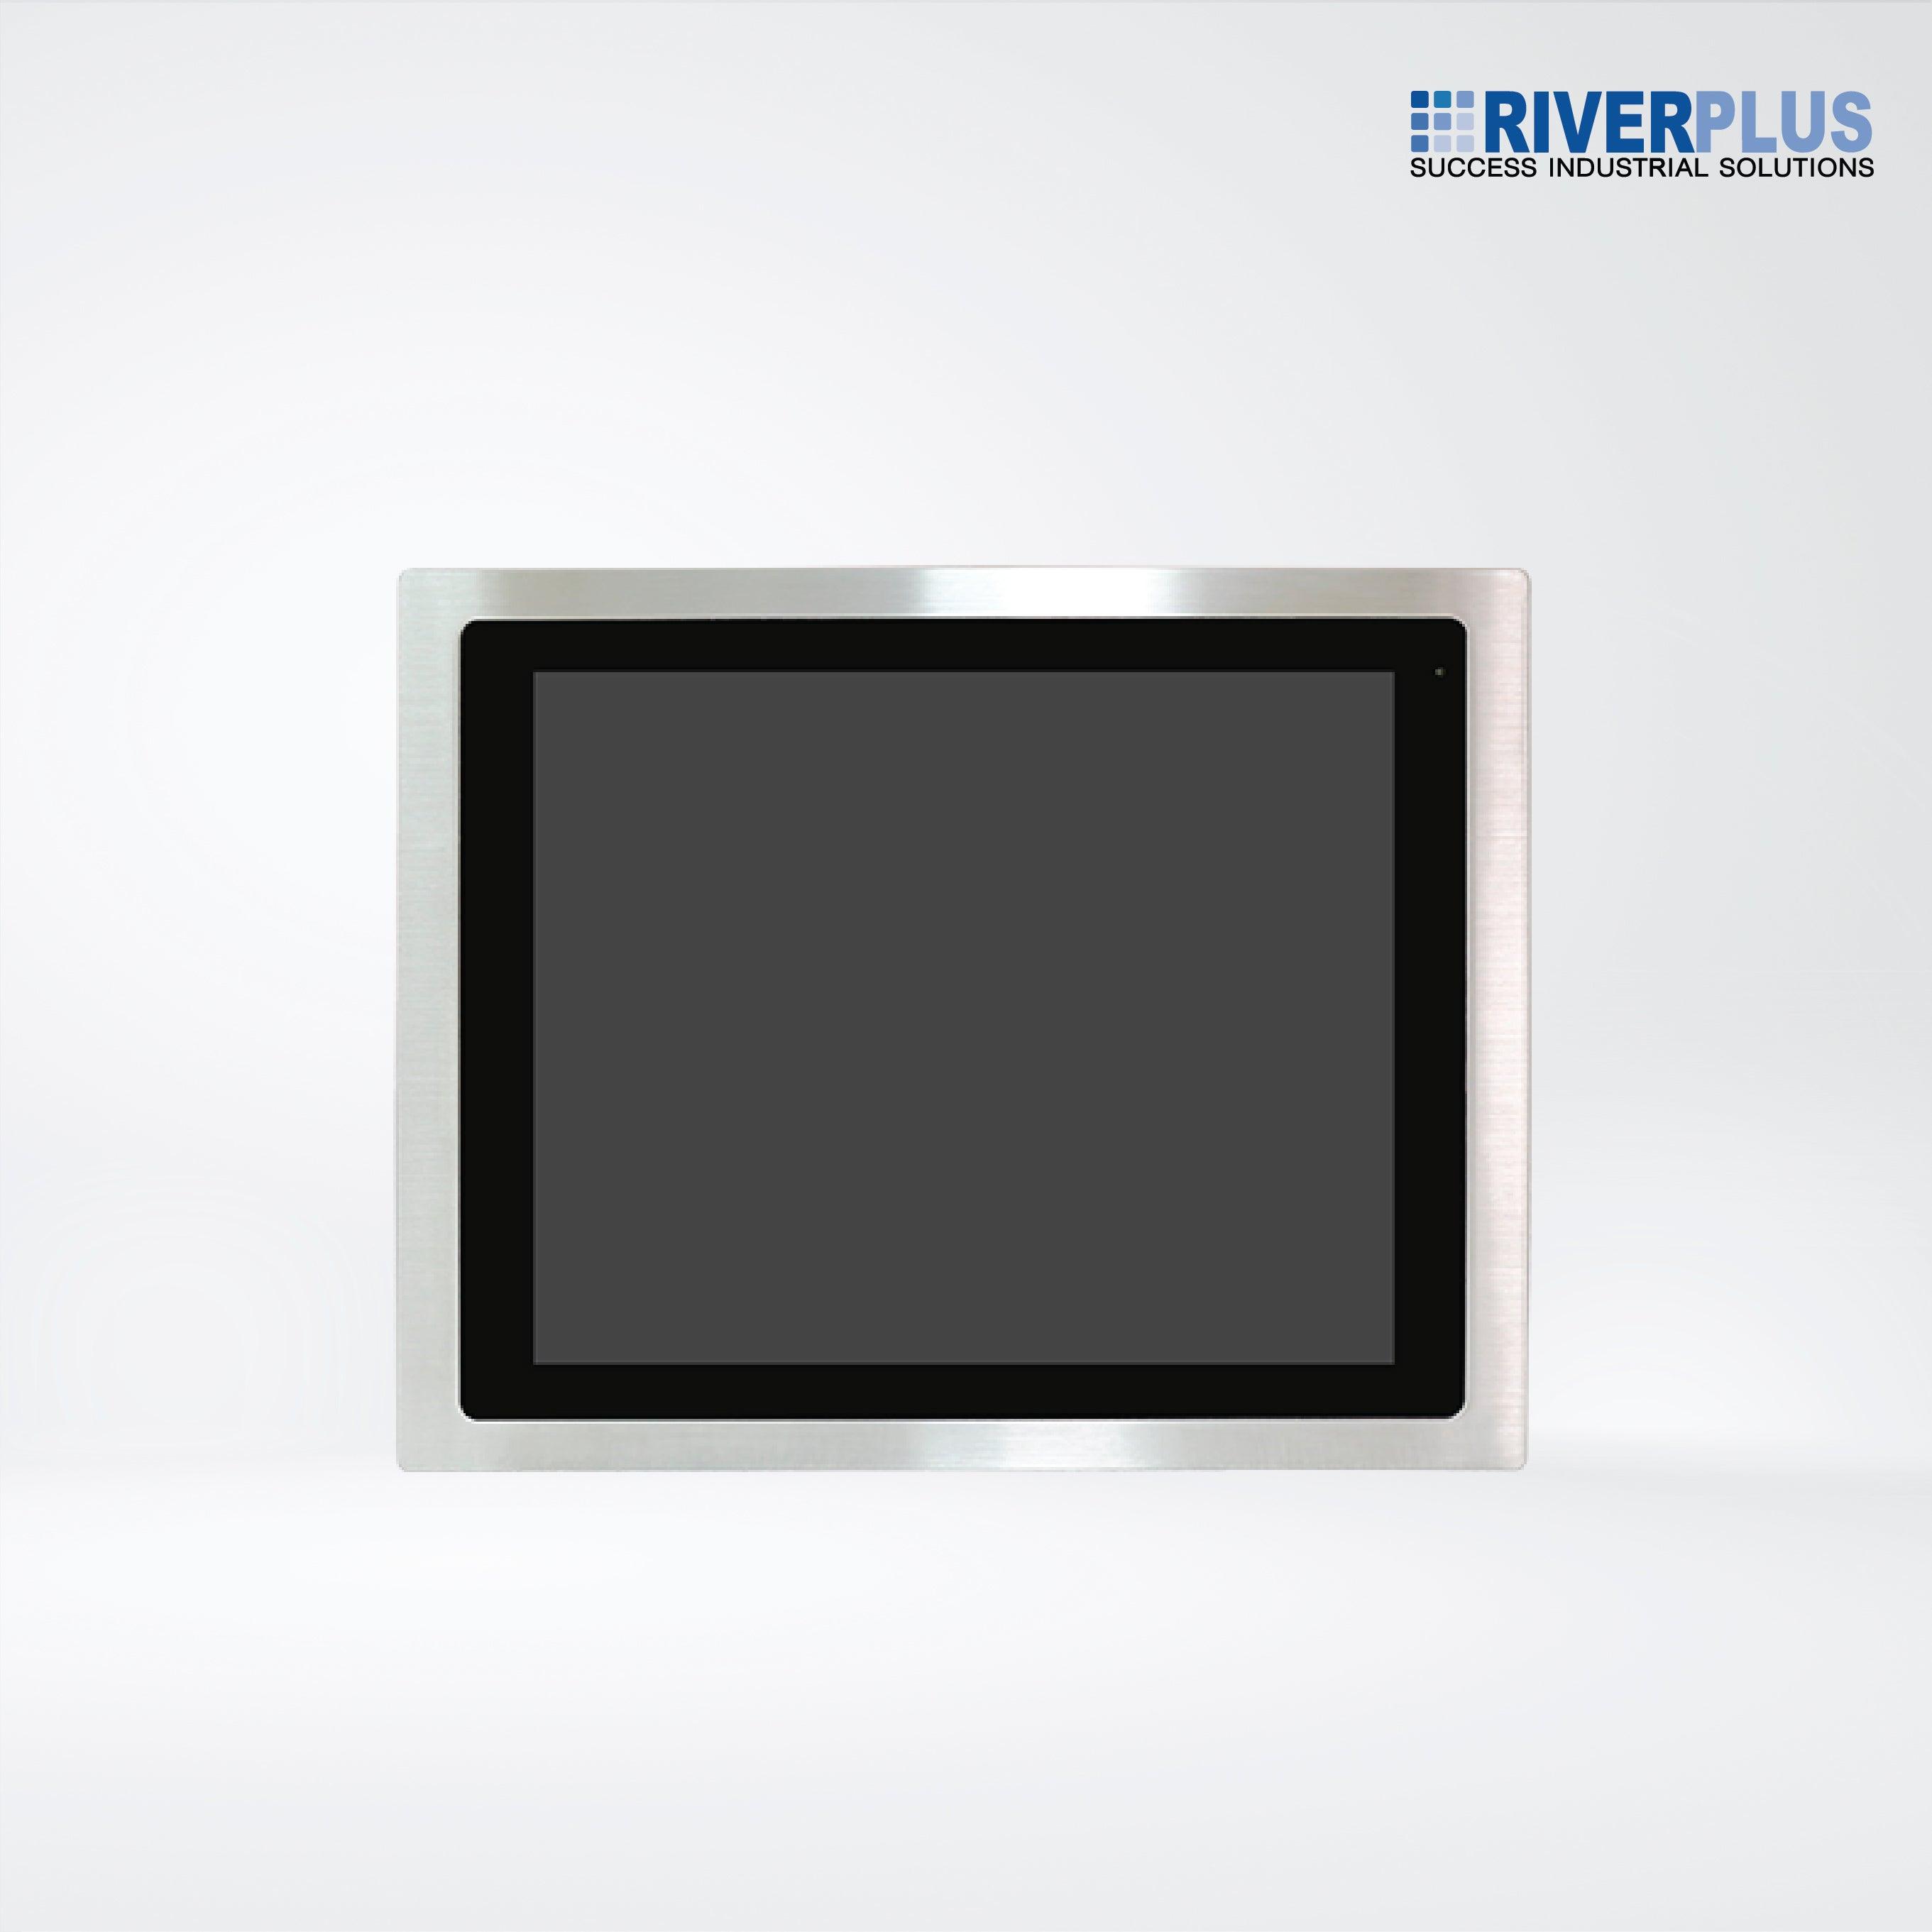 FABS-117P 17” Flat Front Panel IP66 Stainless Chassis Display - Riverplus